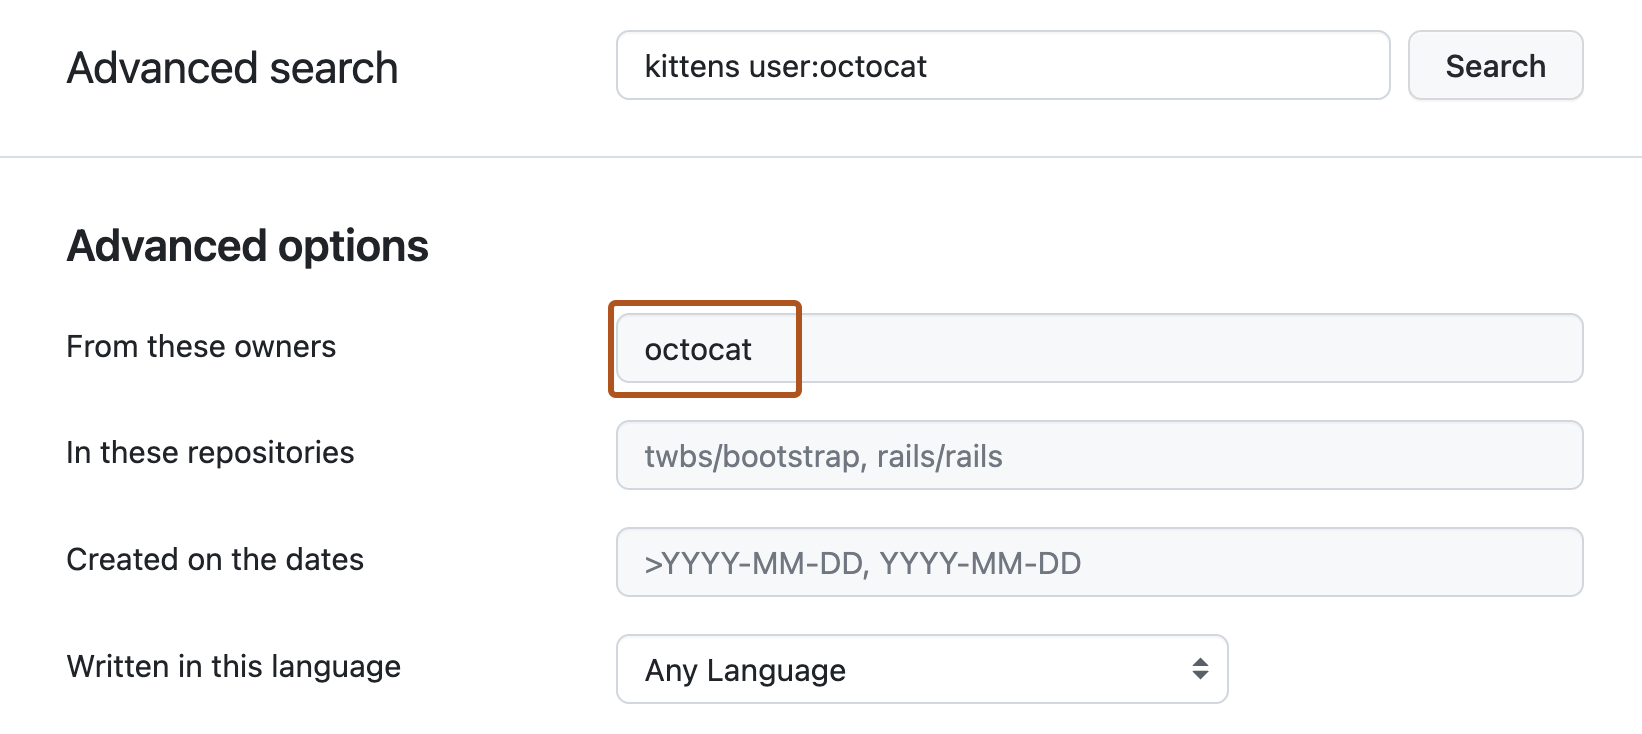 Screenshot of the Advanced search page. The top search bar is filled in with the query "kittens user:octocat" and, under the "Advanced options" section below, the "From these owners" text box contains the term "octocat" and is outlined in dark orange.